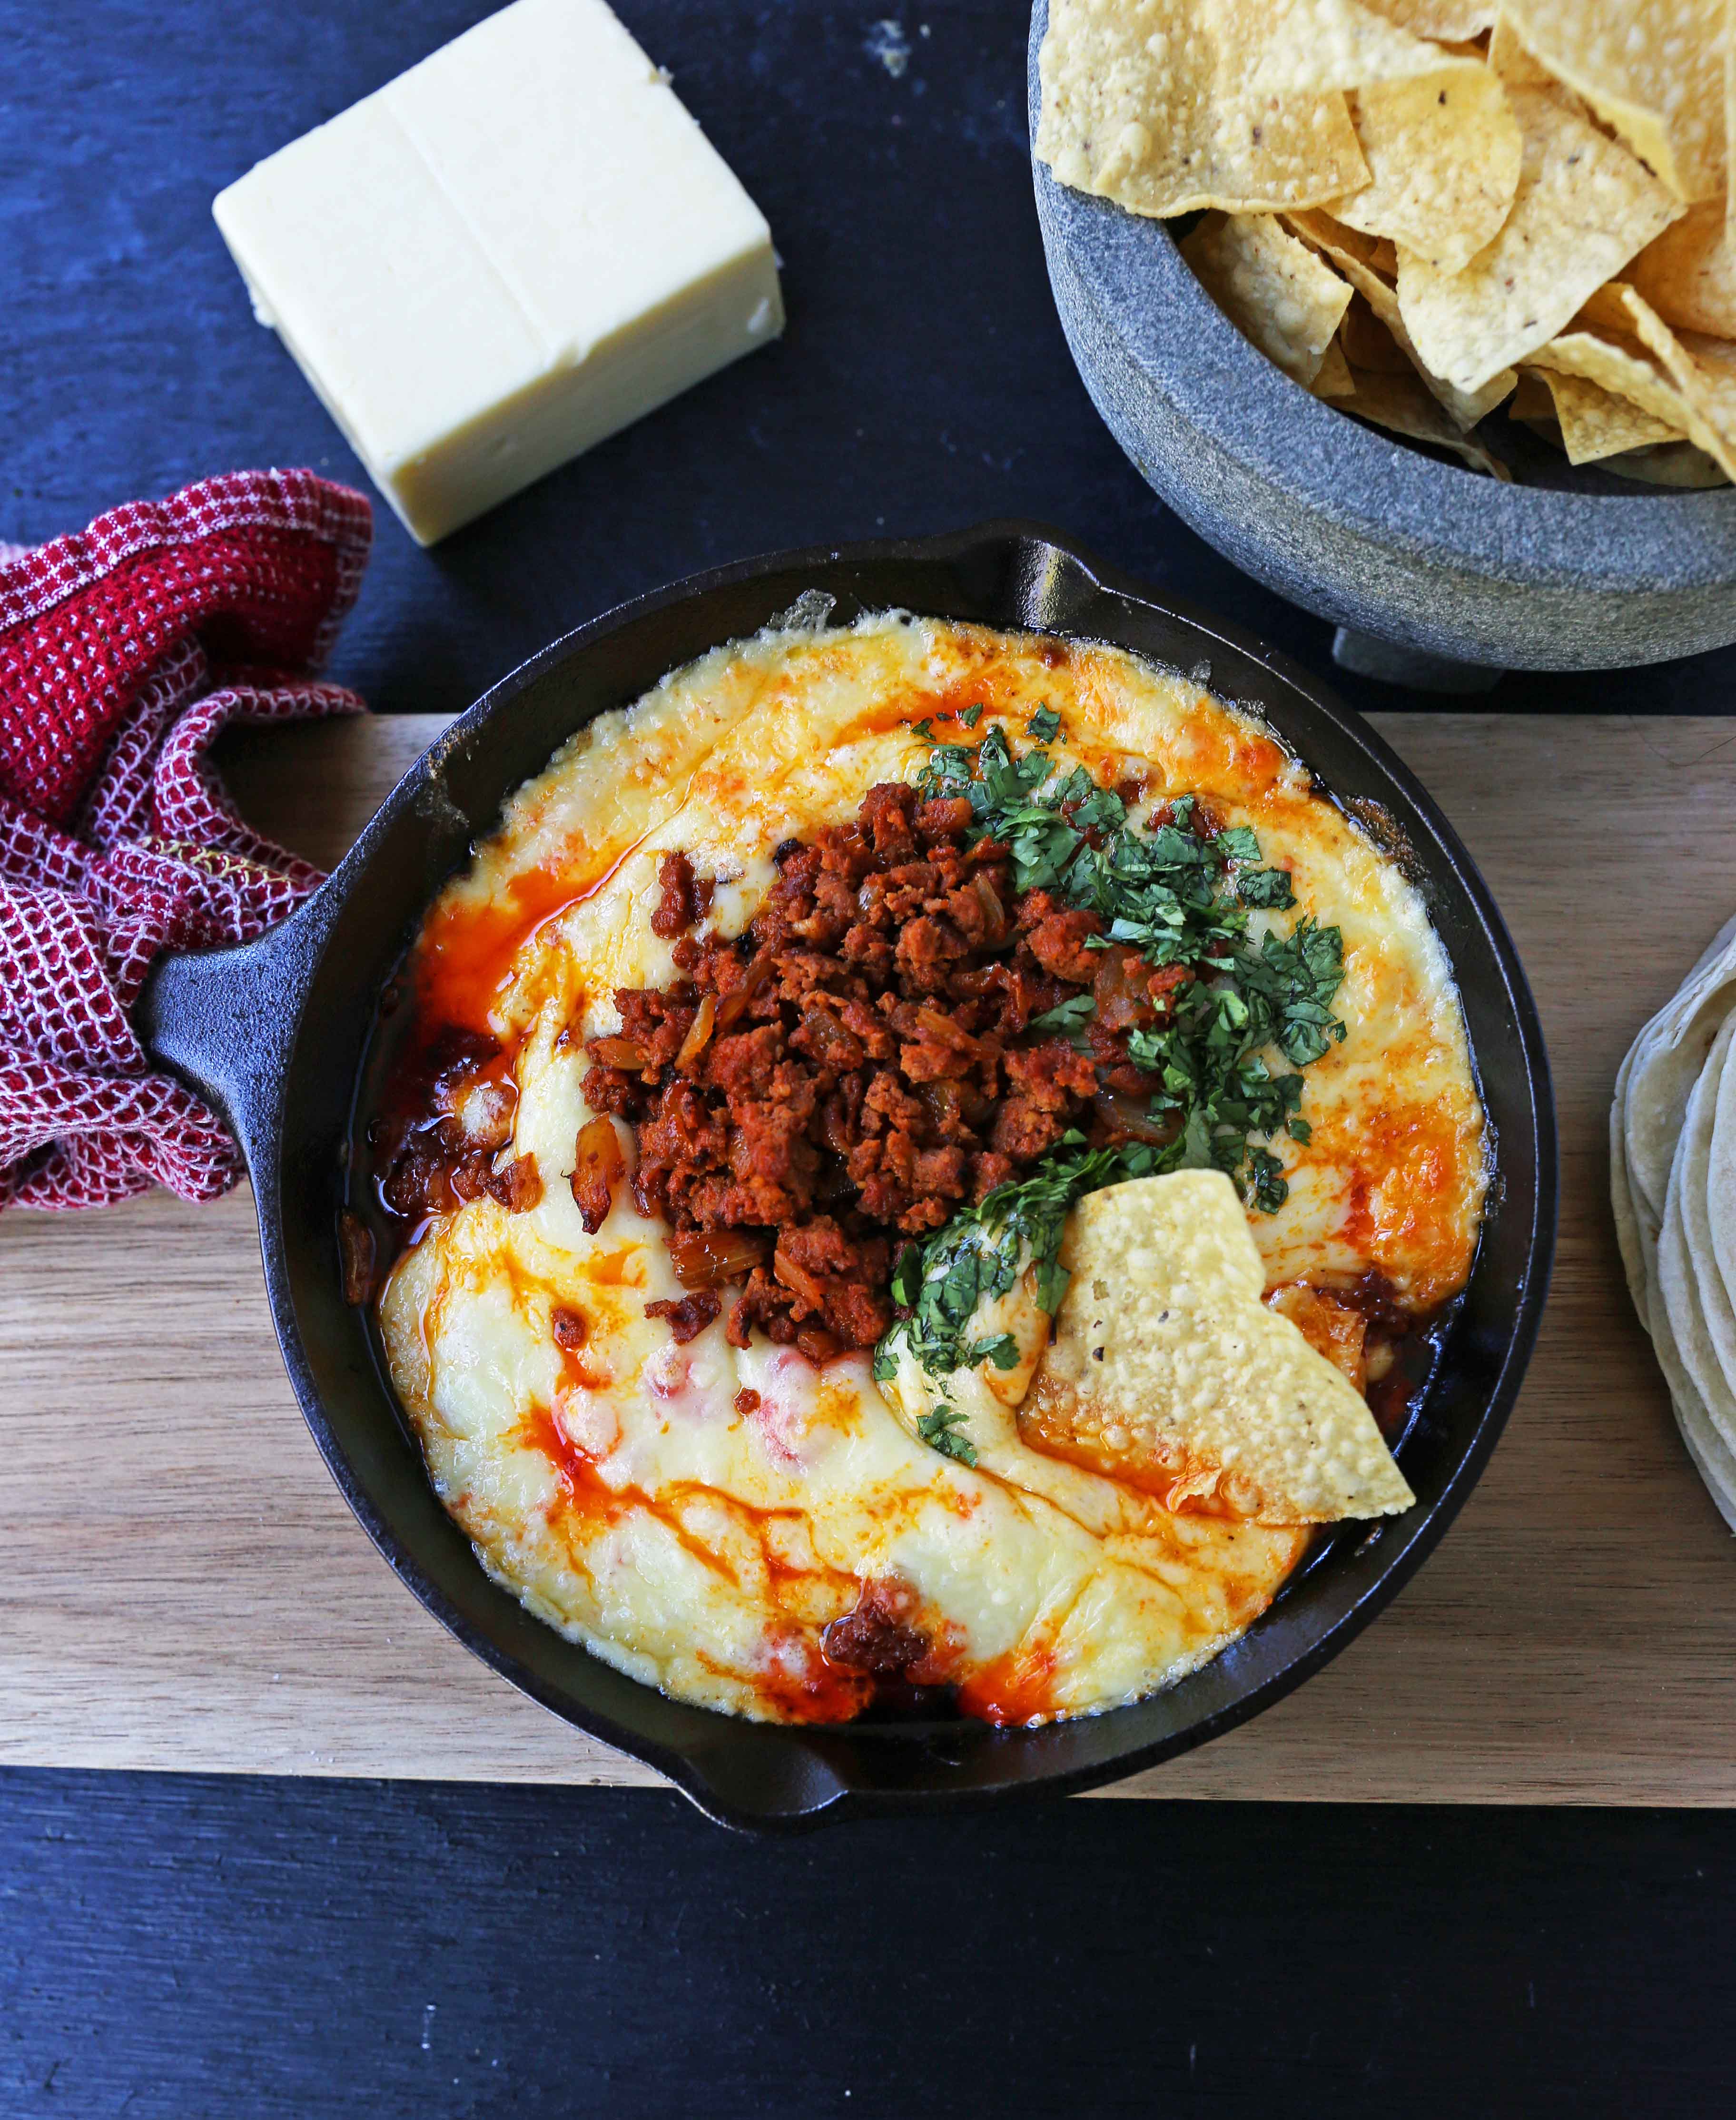 Queso Fundido with Chorizo. A skillet of melted Mexican cheeses seasoned with peppers, onions, and spicy Mexican chorizo sausage and served with hot tortillas or chips. The perfect Mexican appetizer! www.modernhoney.com #appetizer #appetizers #mexican #mexicanfood #queso #quesofundido